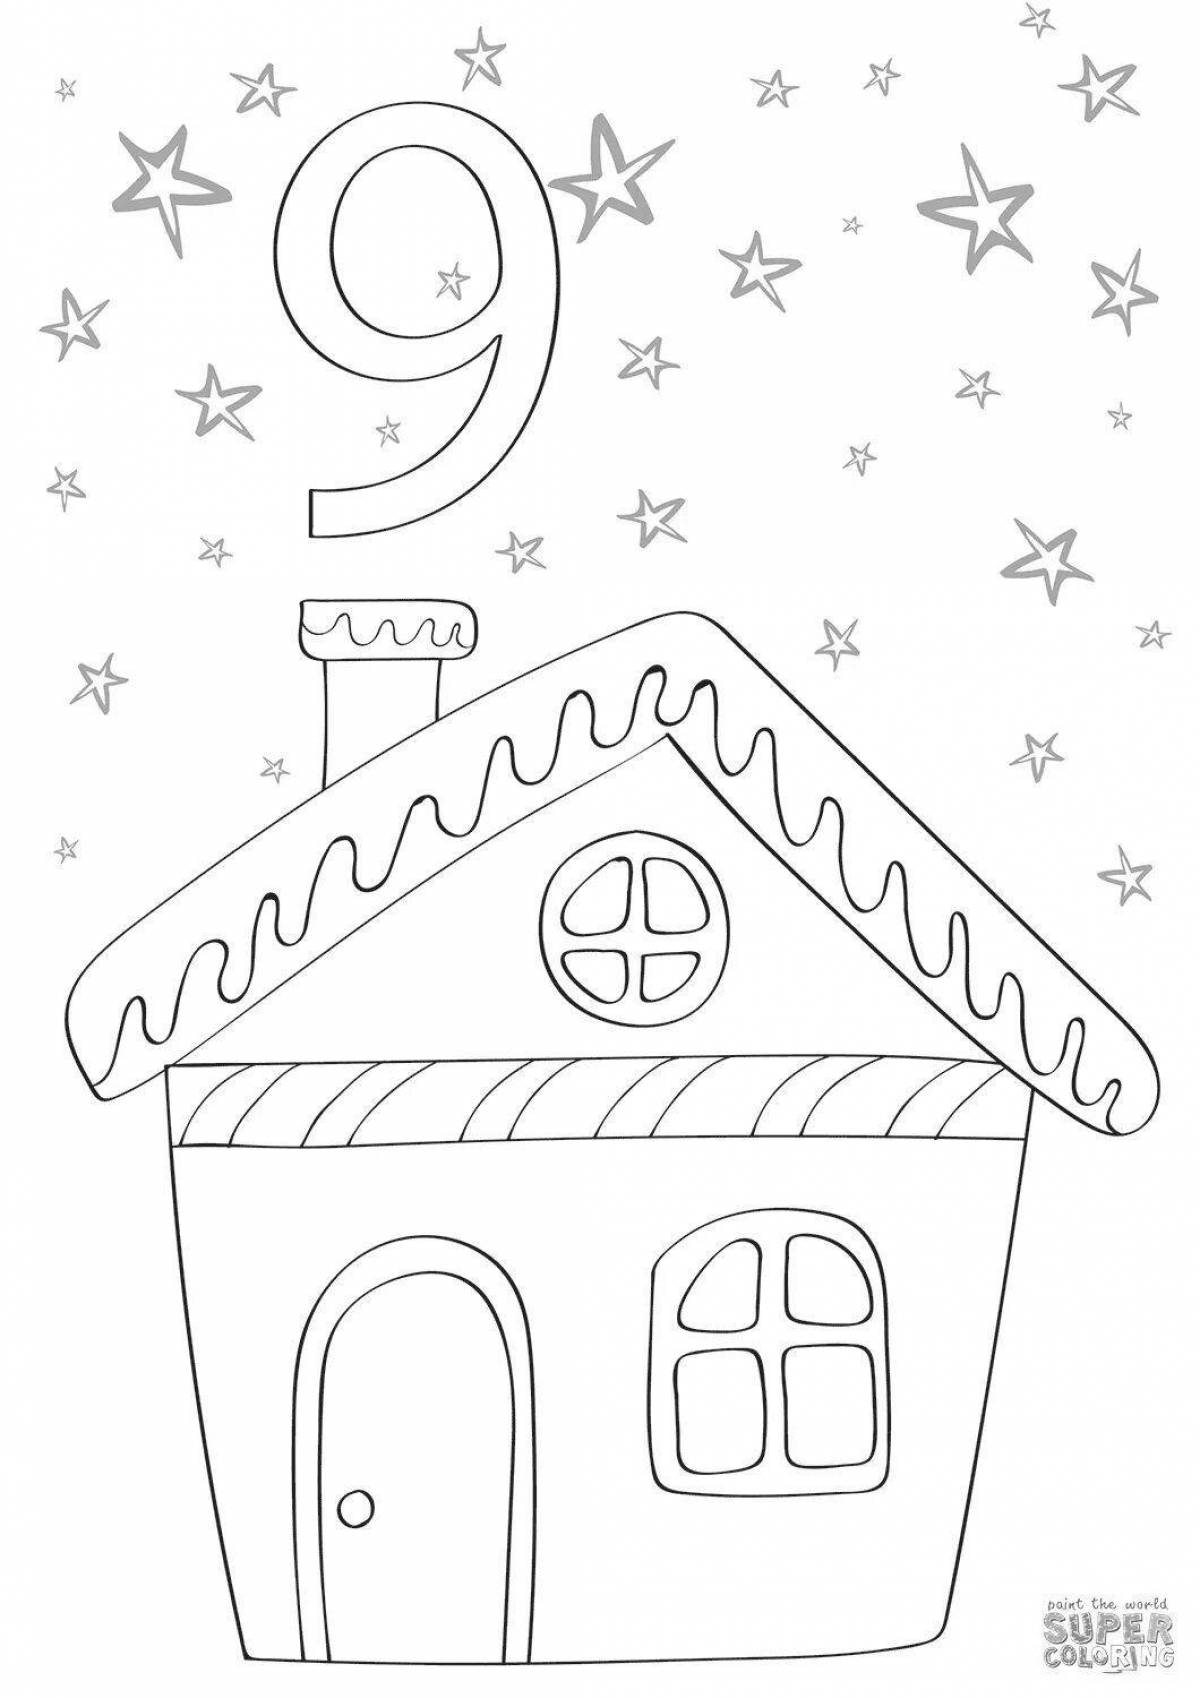 Coloring page festive winter house